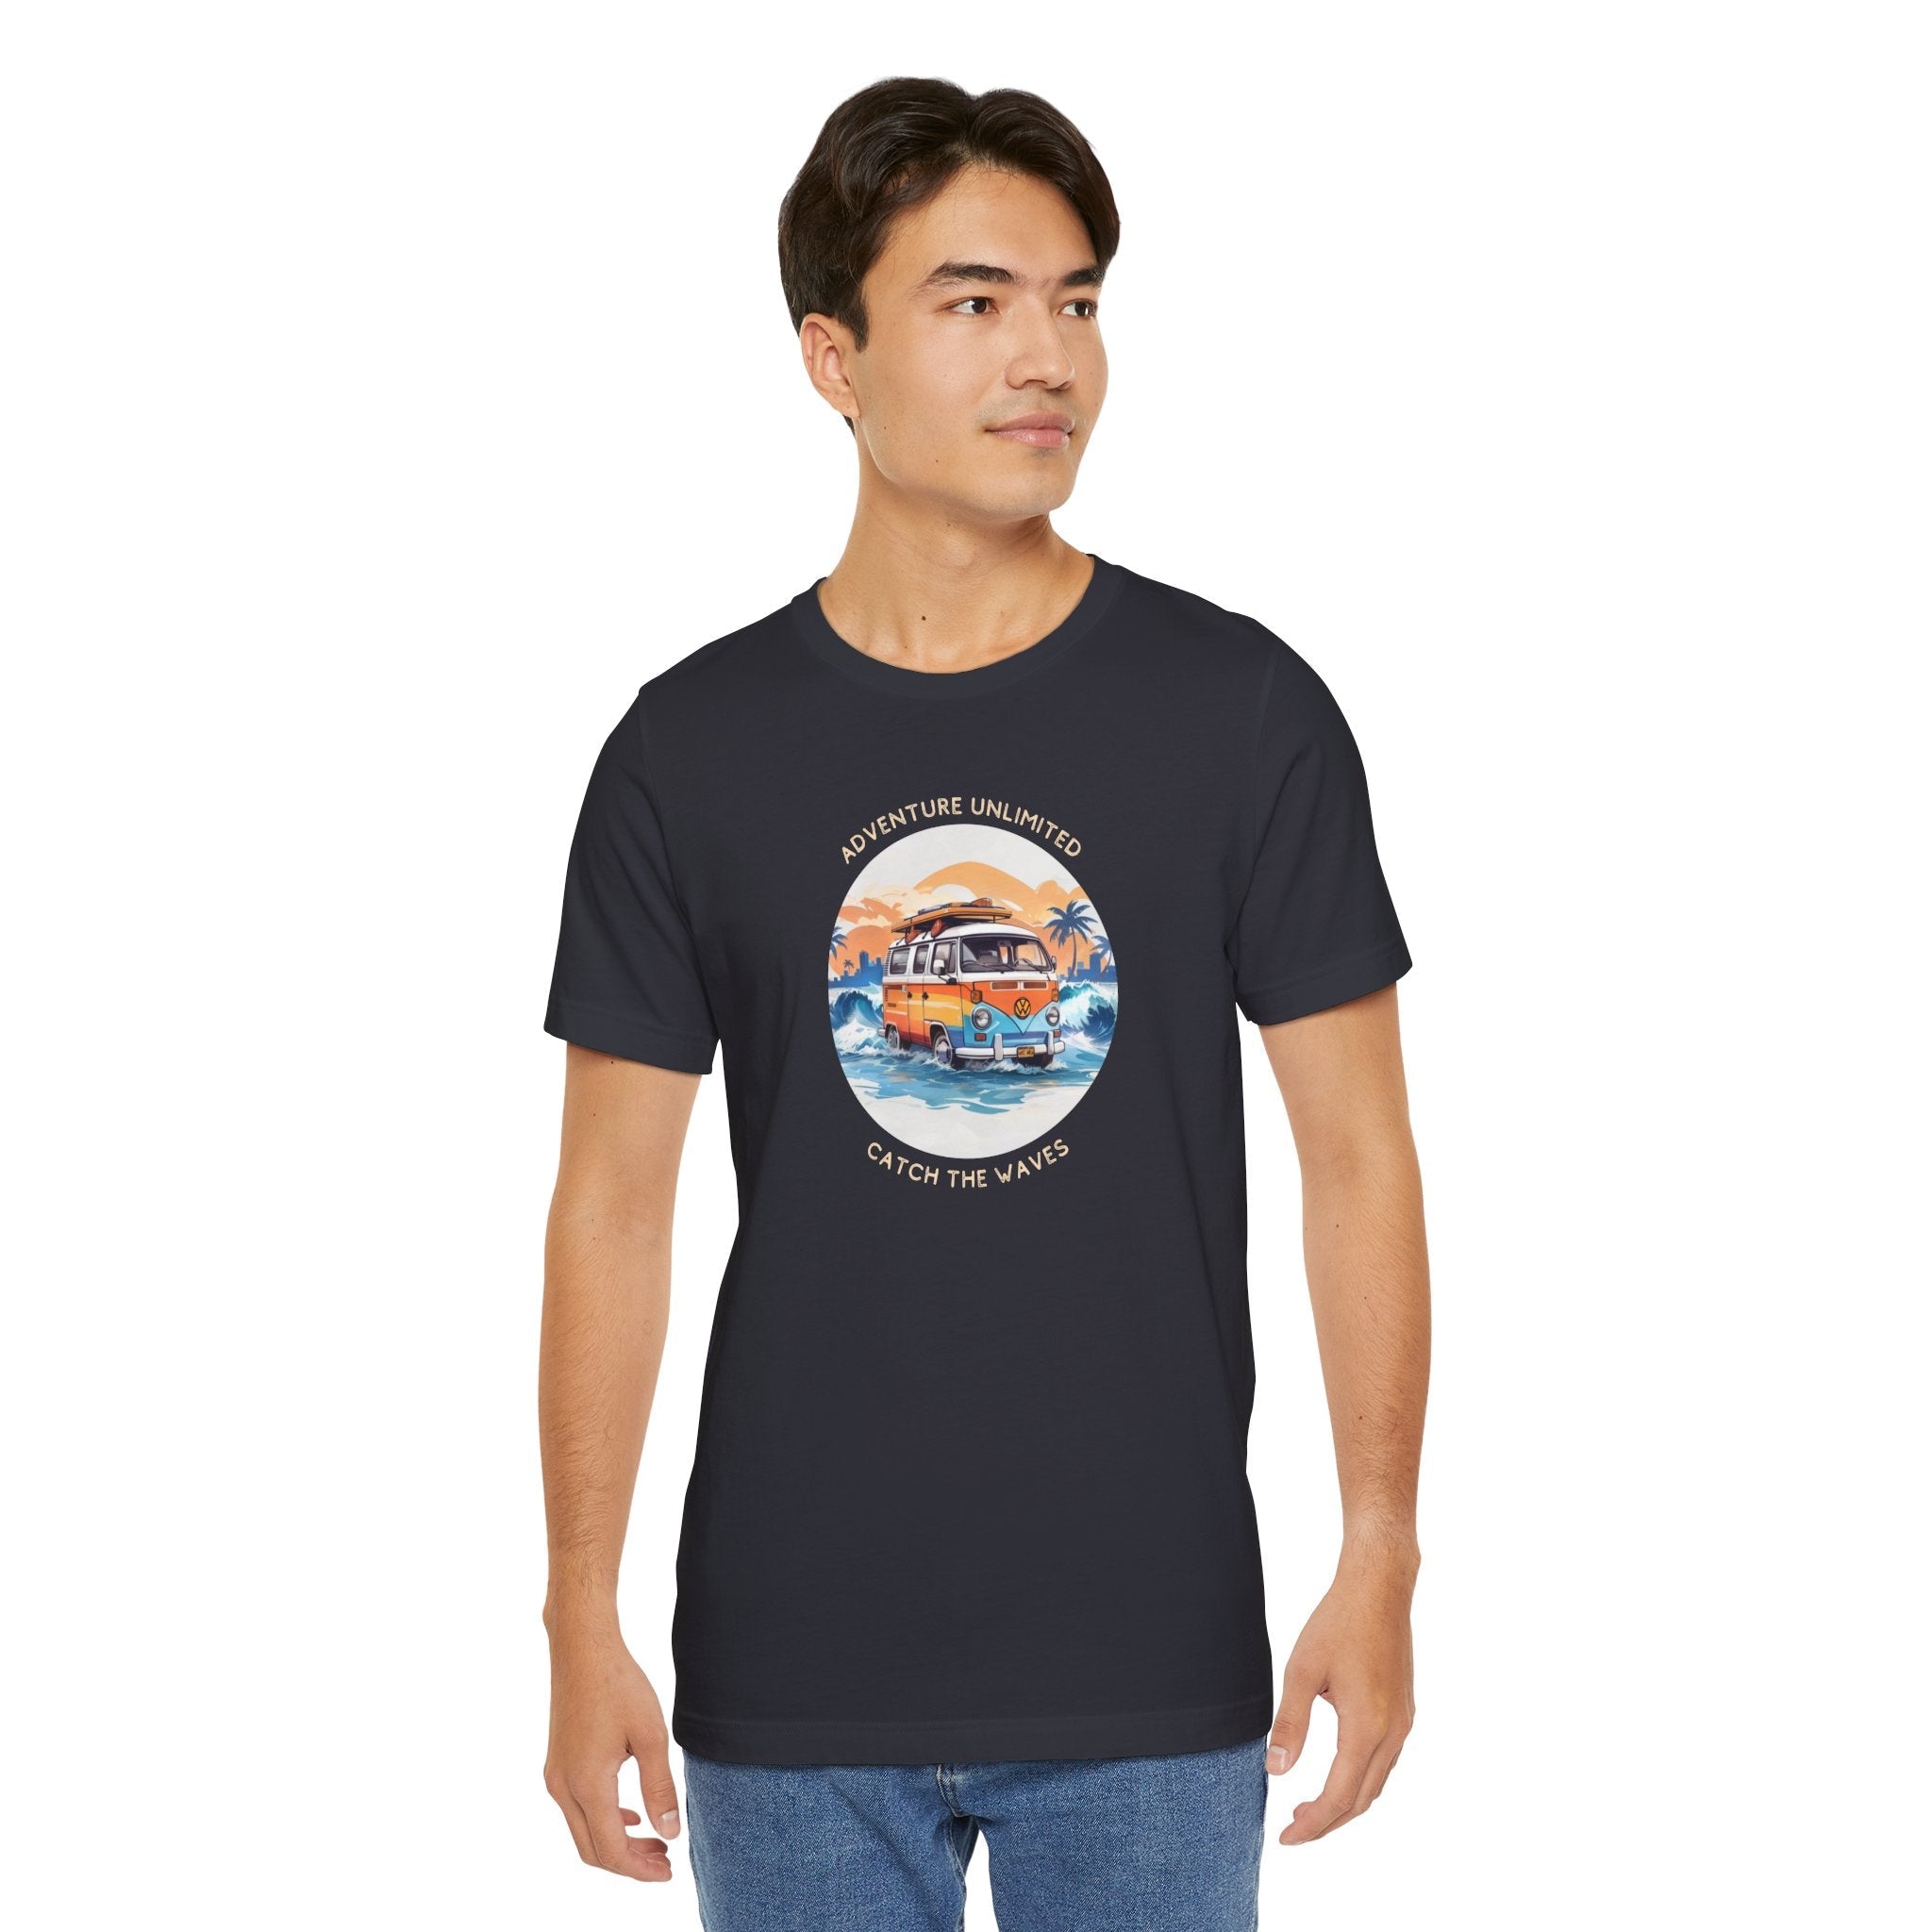 Adventure Unlimited unisex jersey short sleeve tee with man in black bus shirt